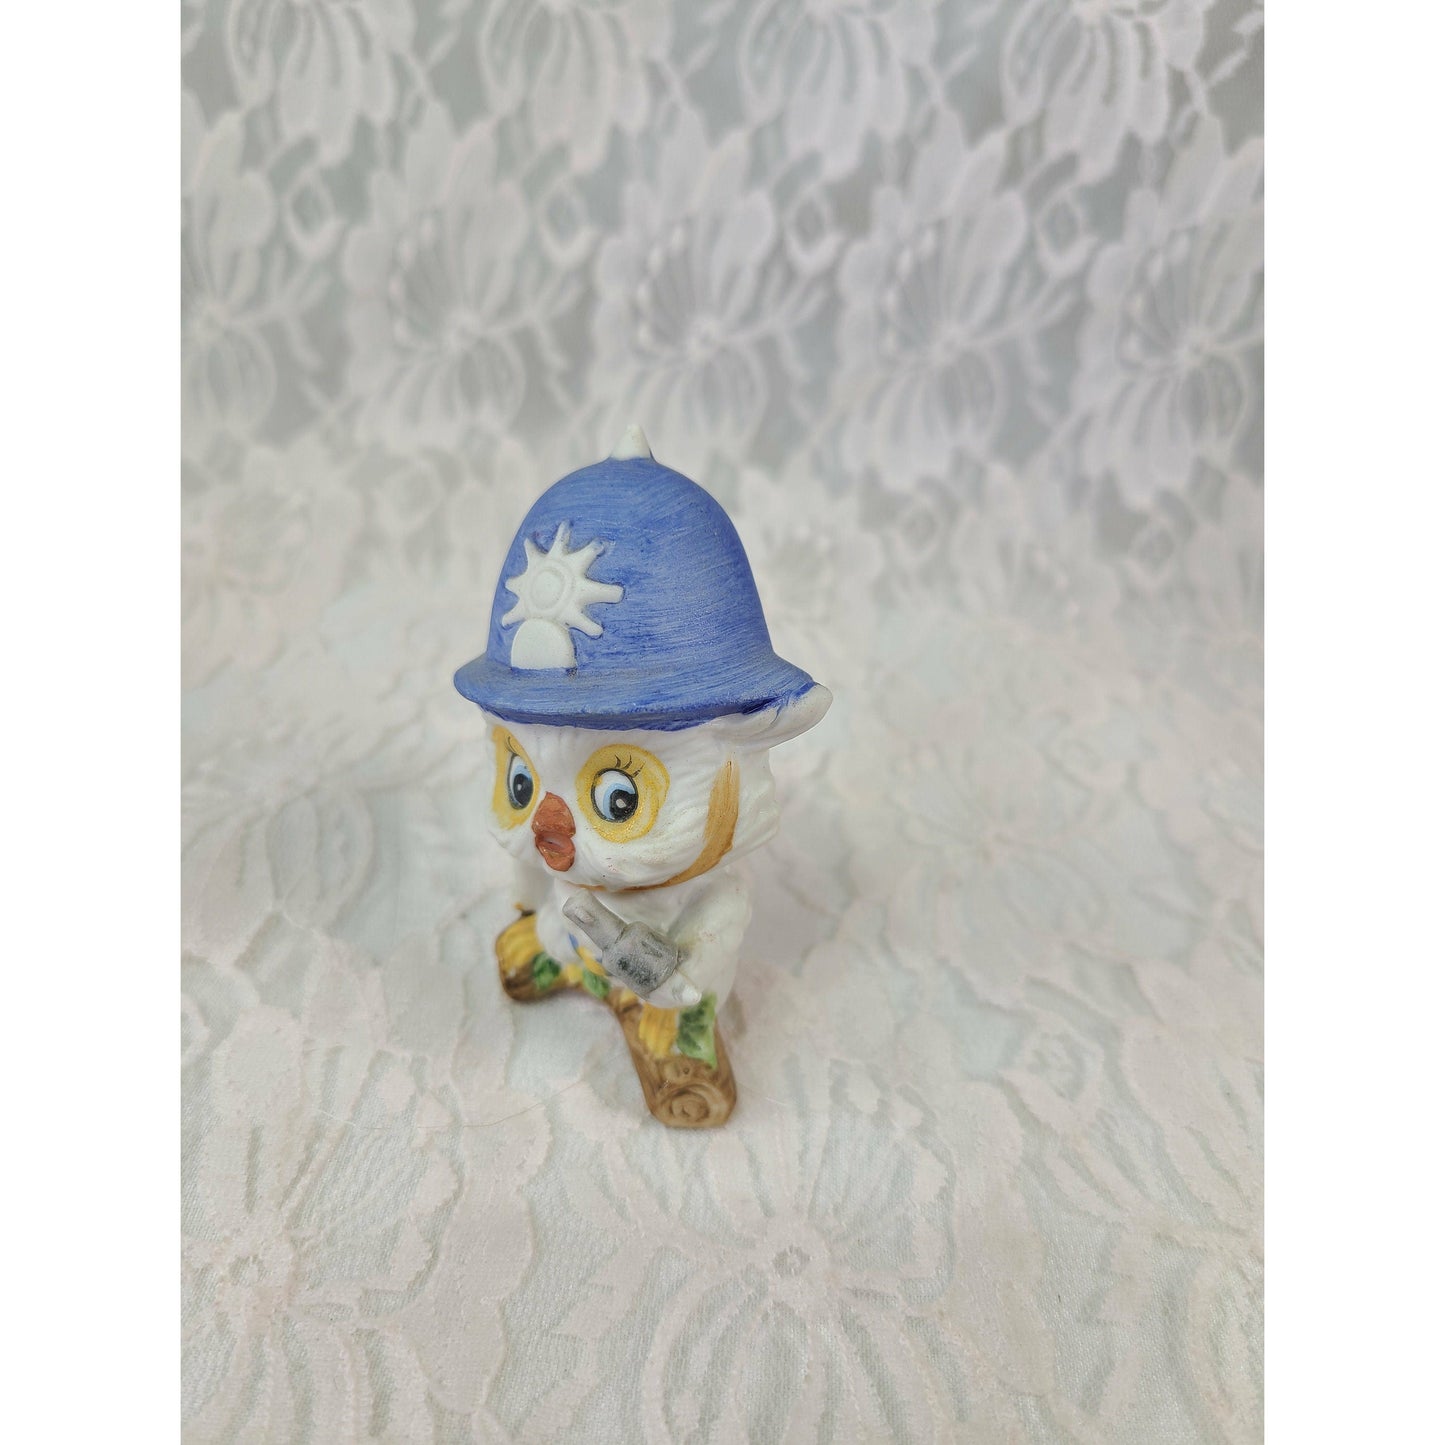 Vintage Bisque Porcelain Owl Figurine ~ London Bobby Beat Cop ~ Keystone Cop Owl with Pistol and Tall Cap ~ 3" Tall